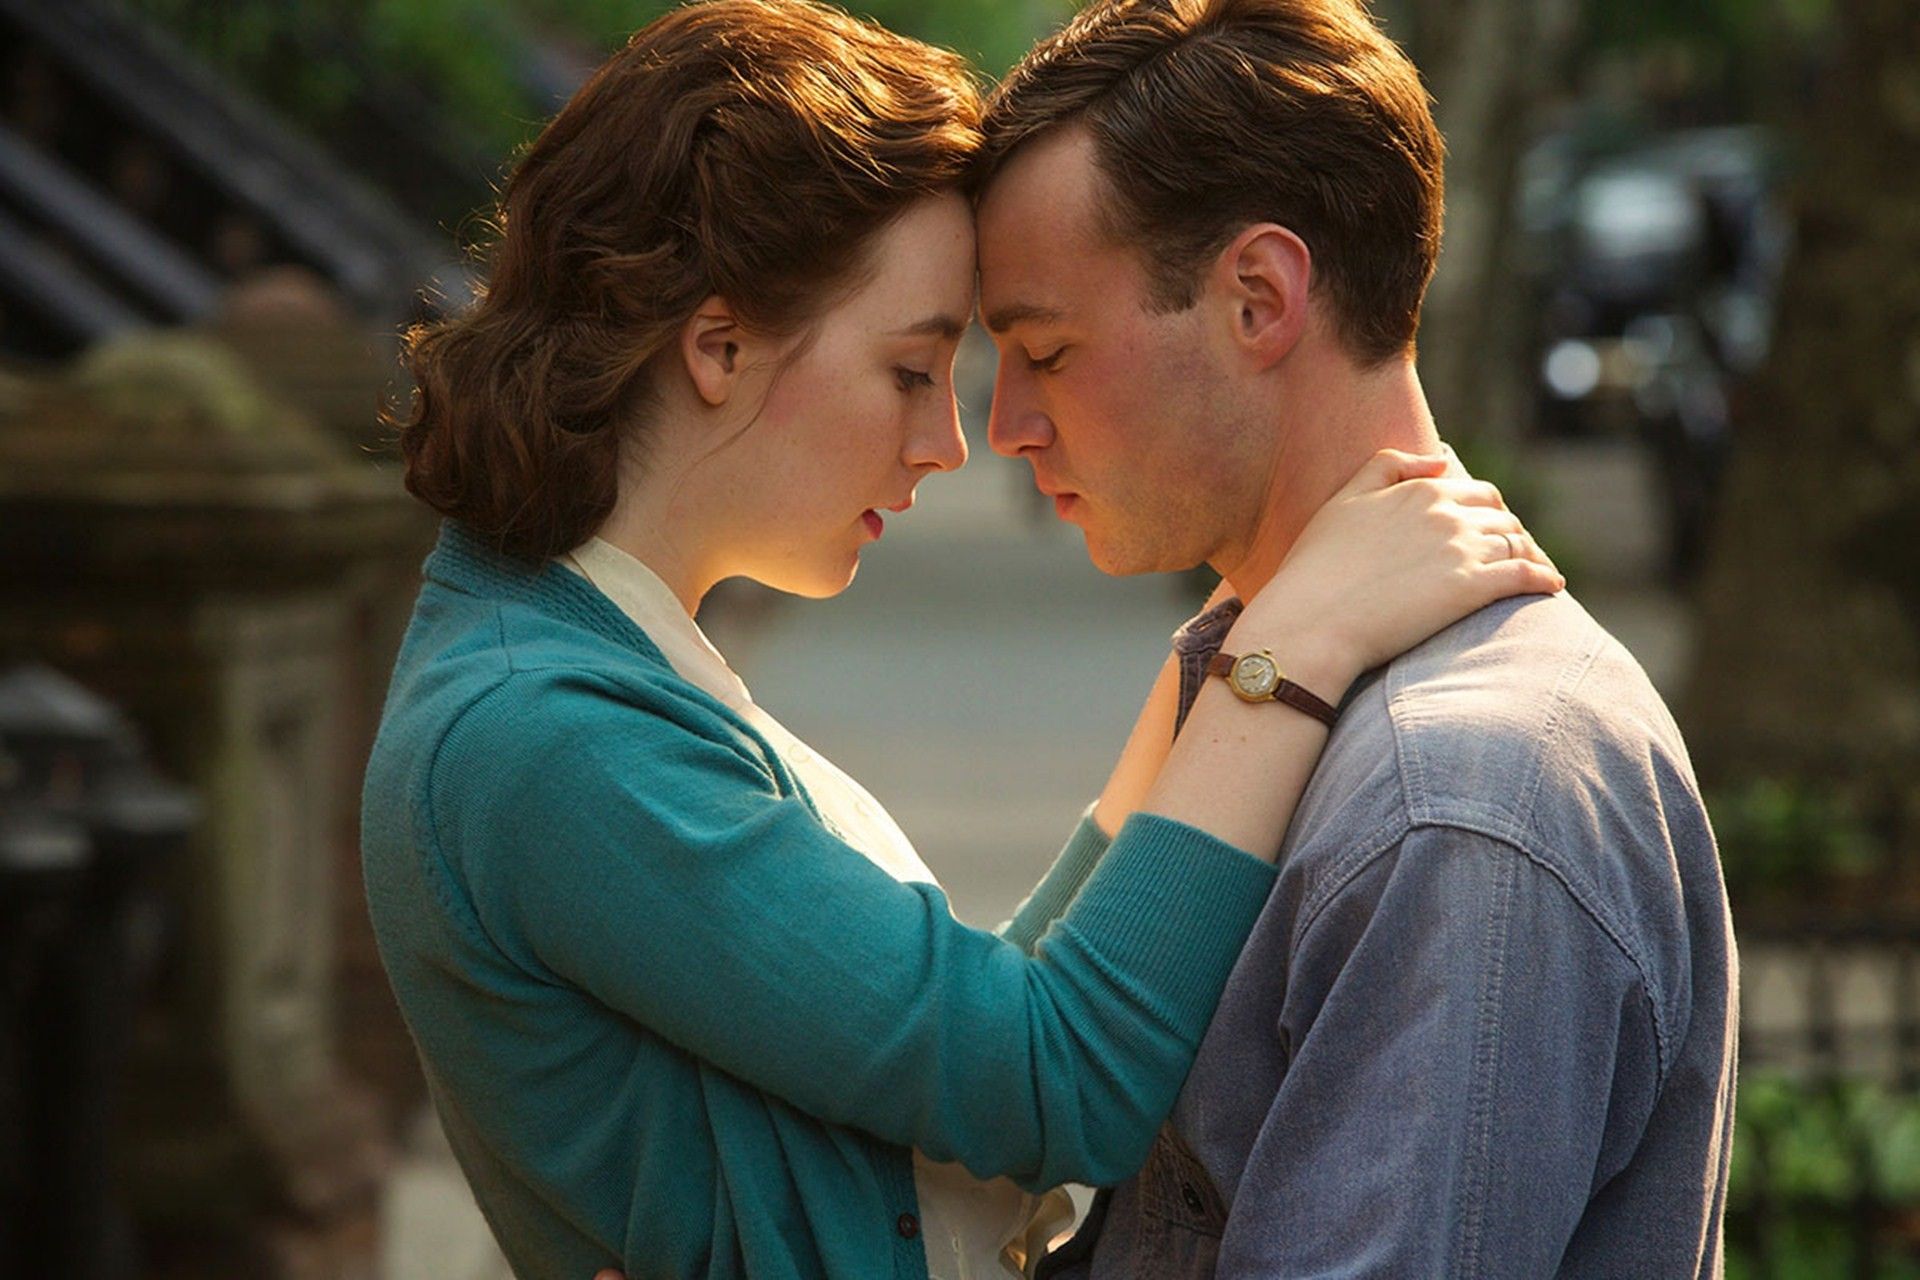 Brooklyn' Released Starring Saoirse Ronan And Julie Waters. Film About Her